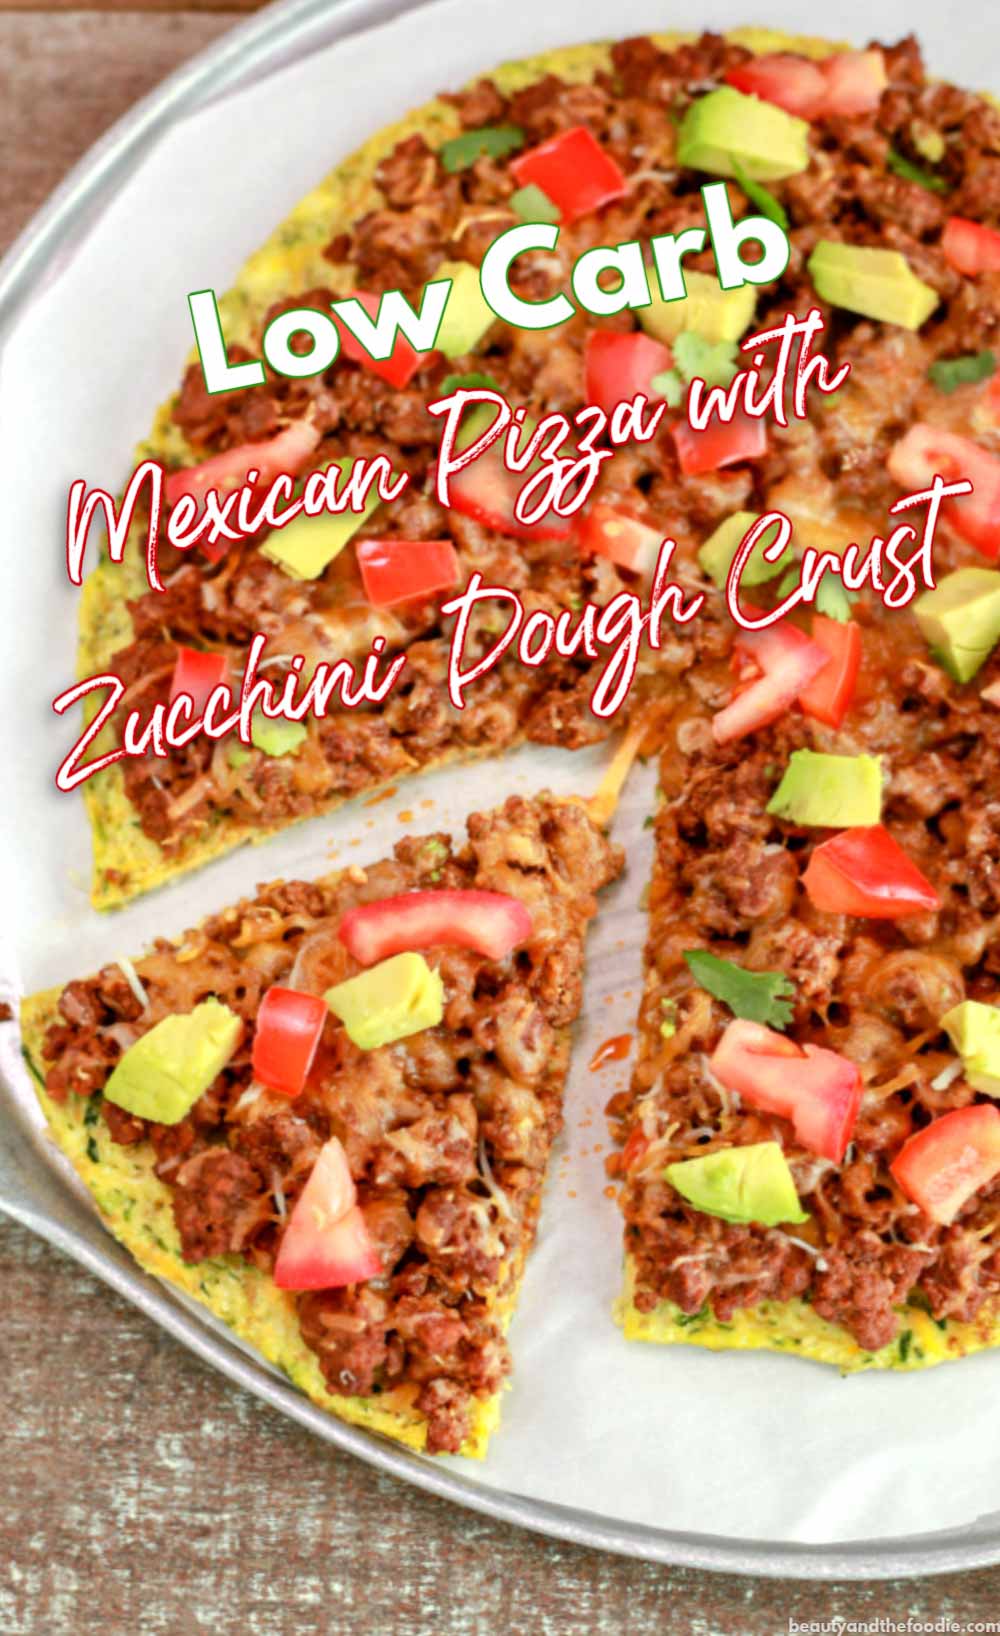 Keto & Low Carb Mexican Pizza on zucchini  doughcrust